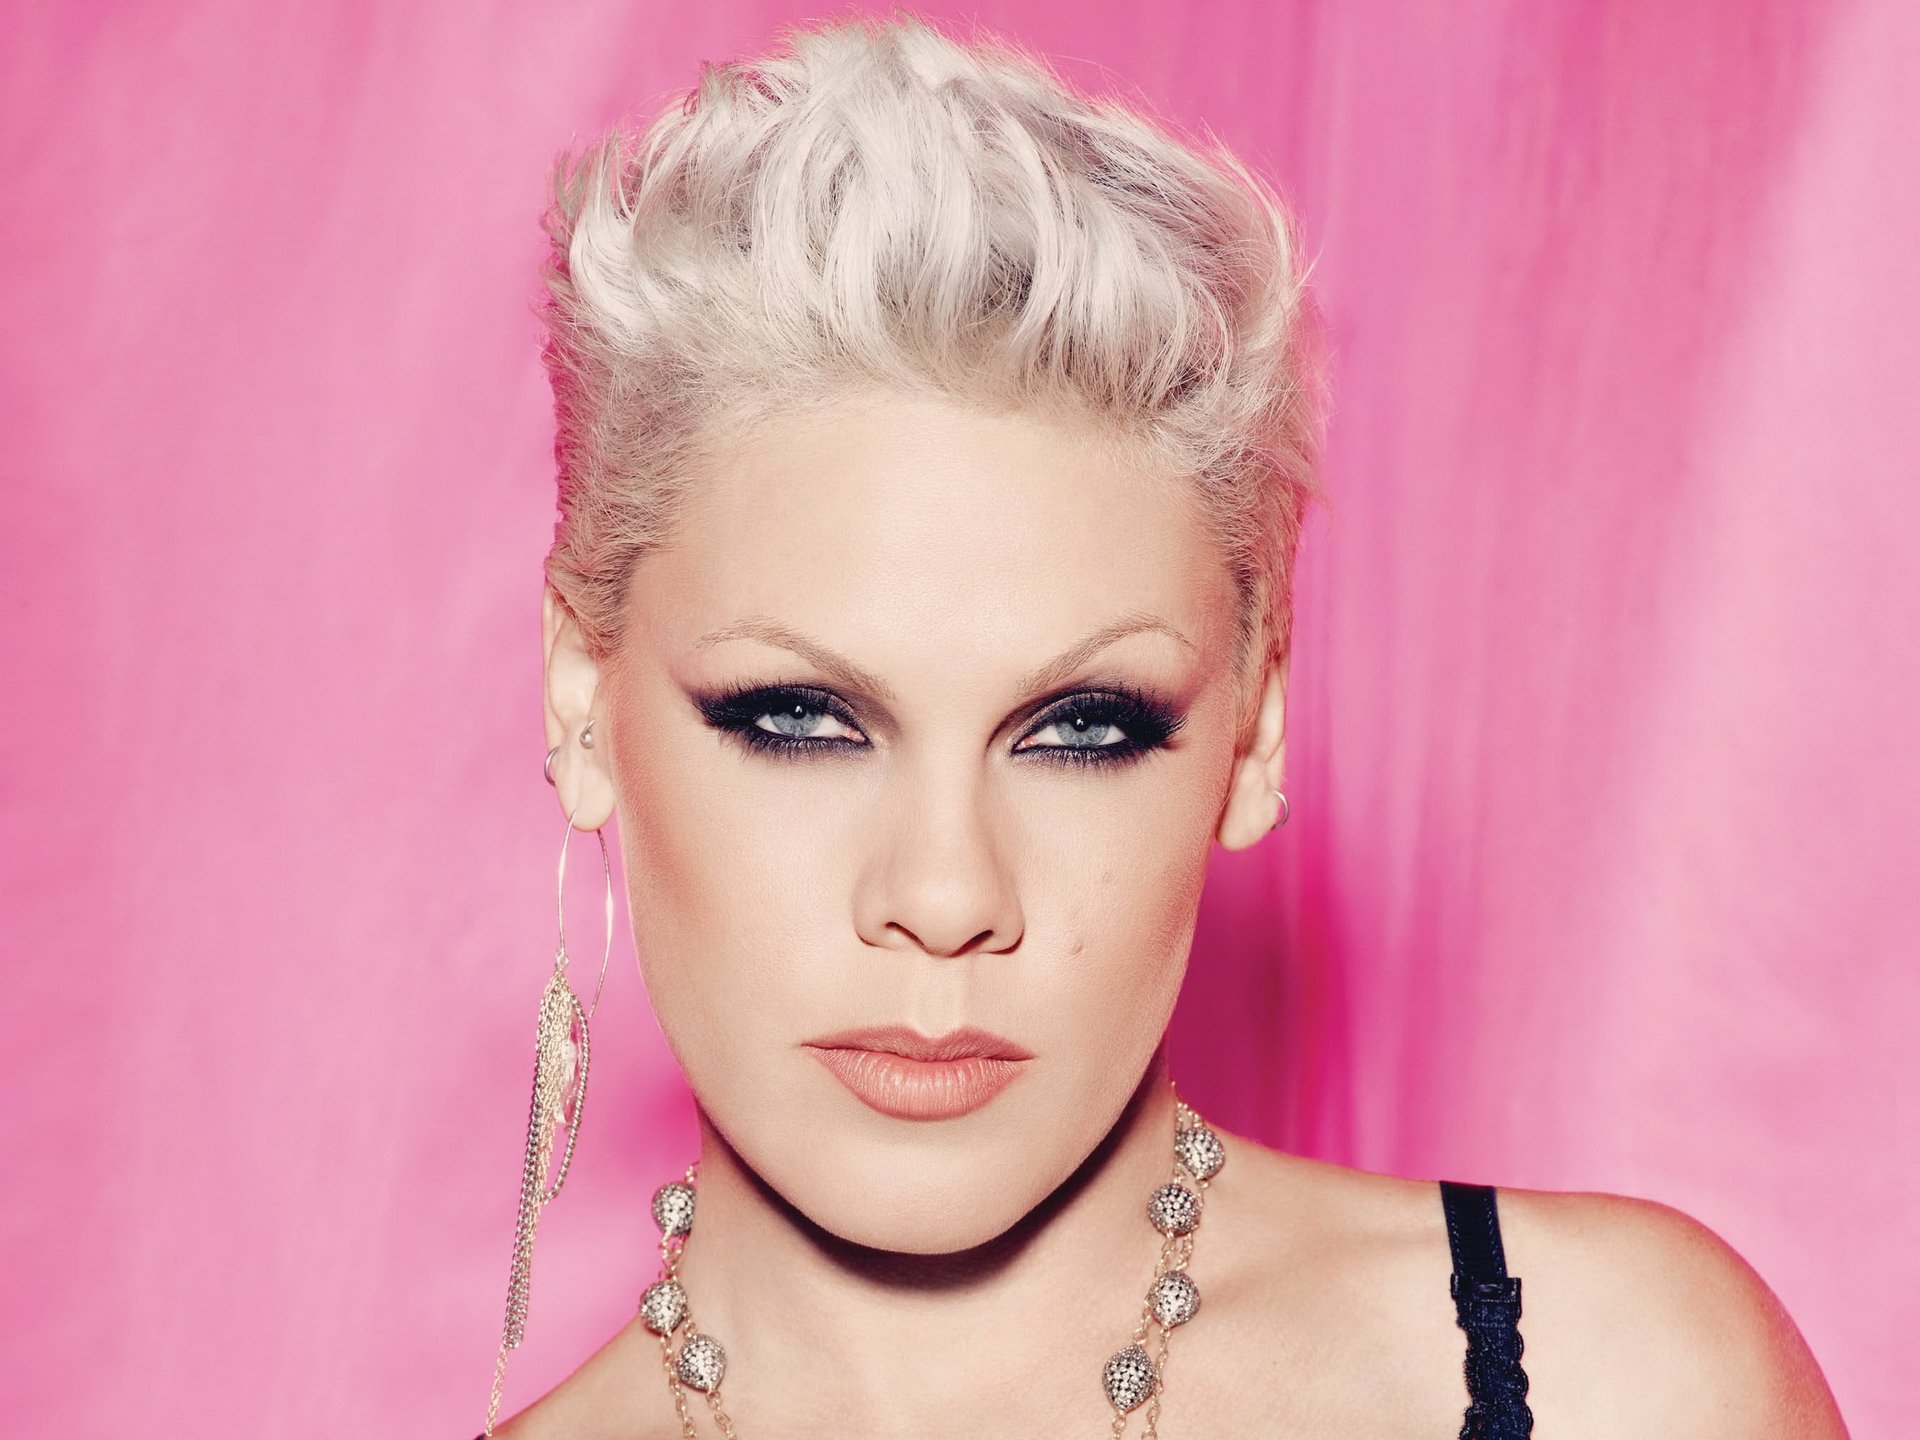 Happy birthday to one of my personal style icons, P!nk!    